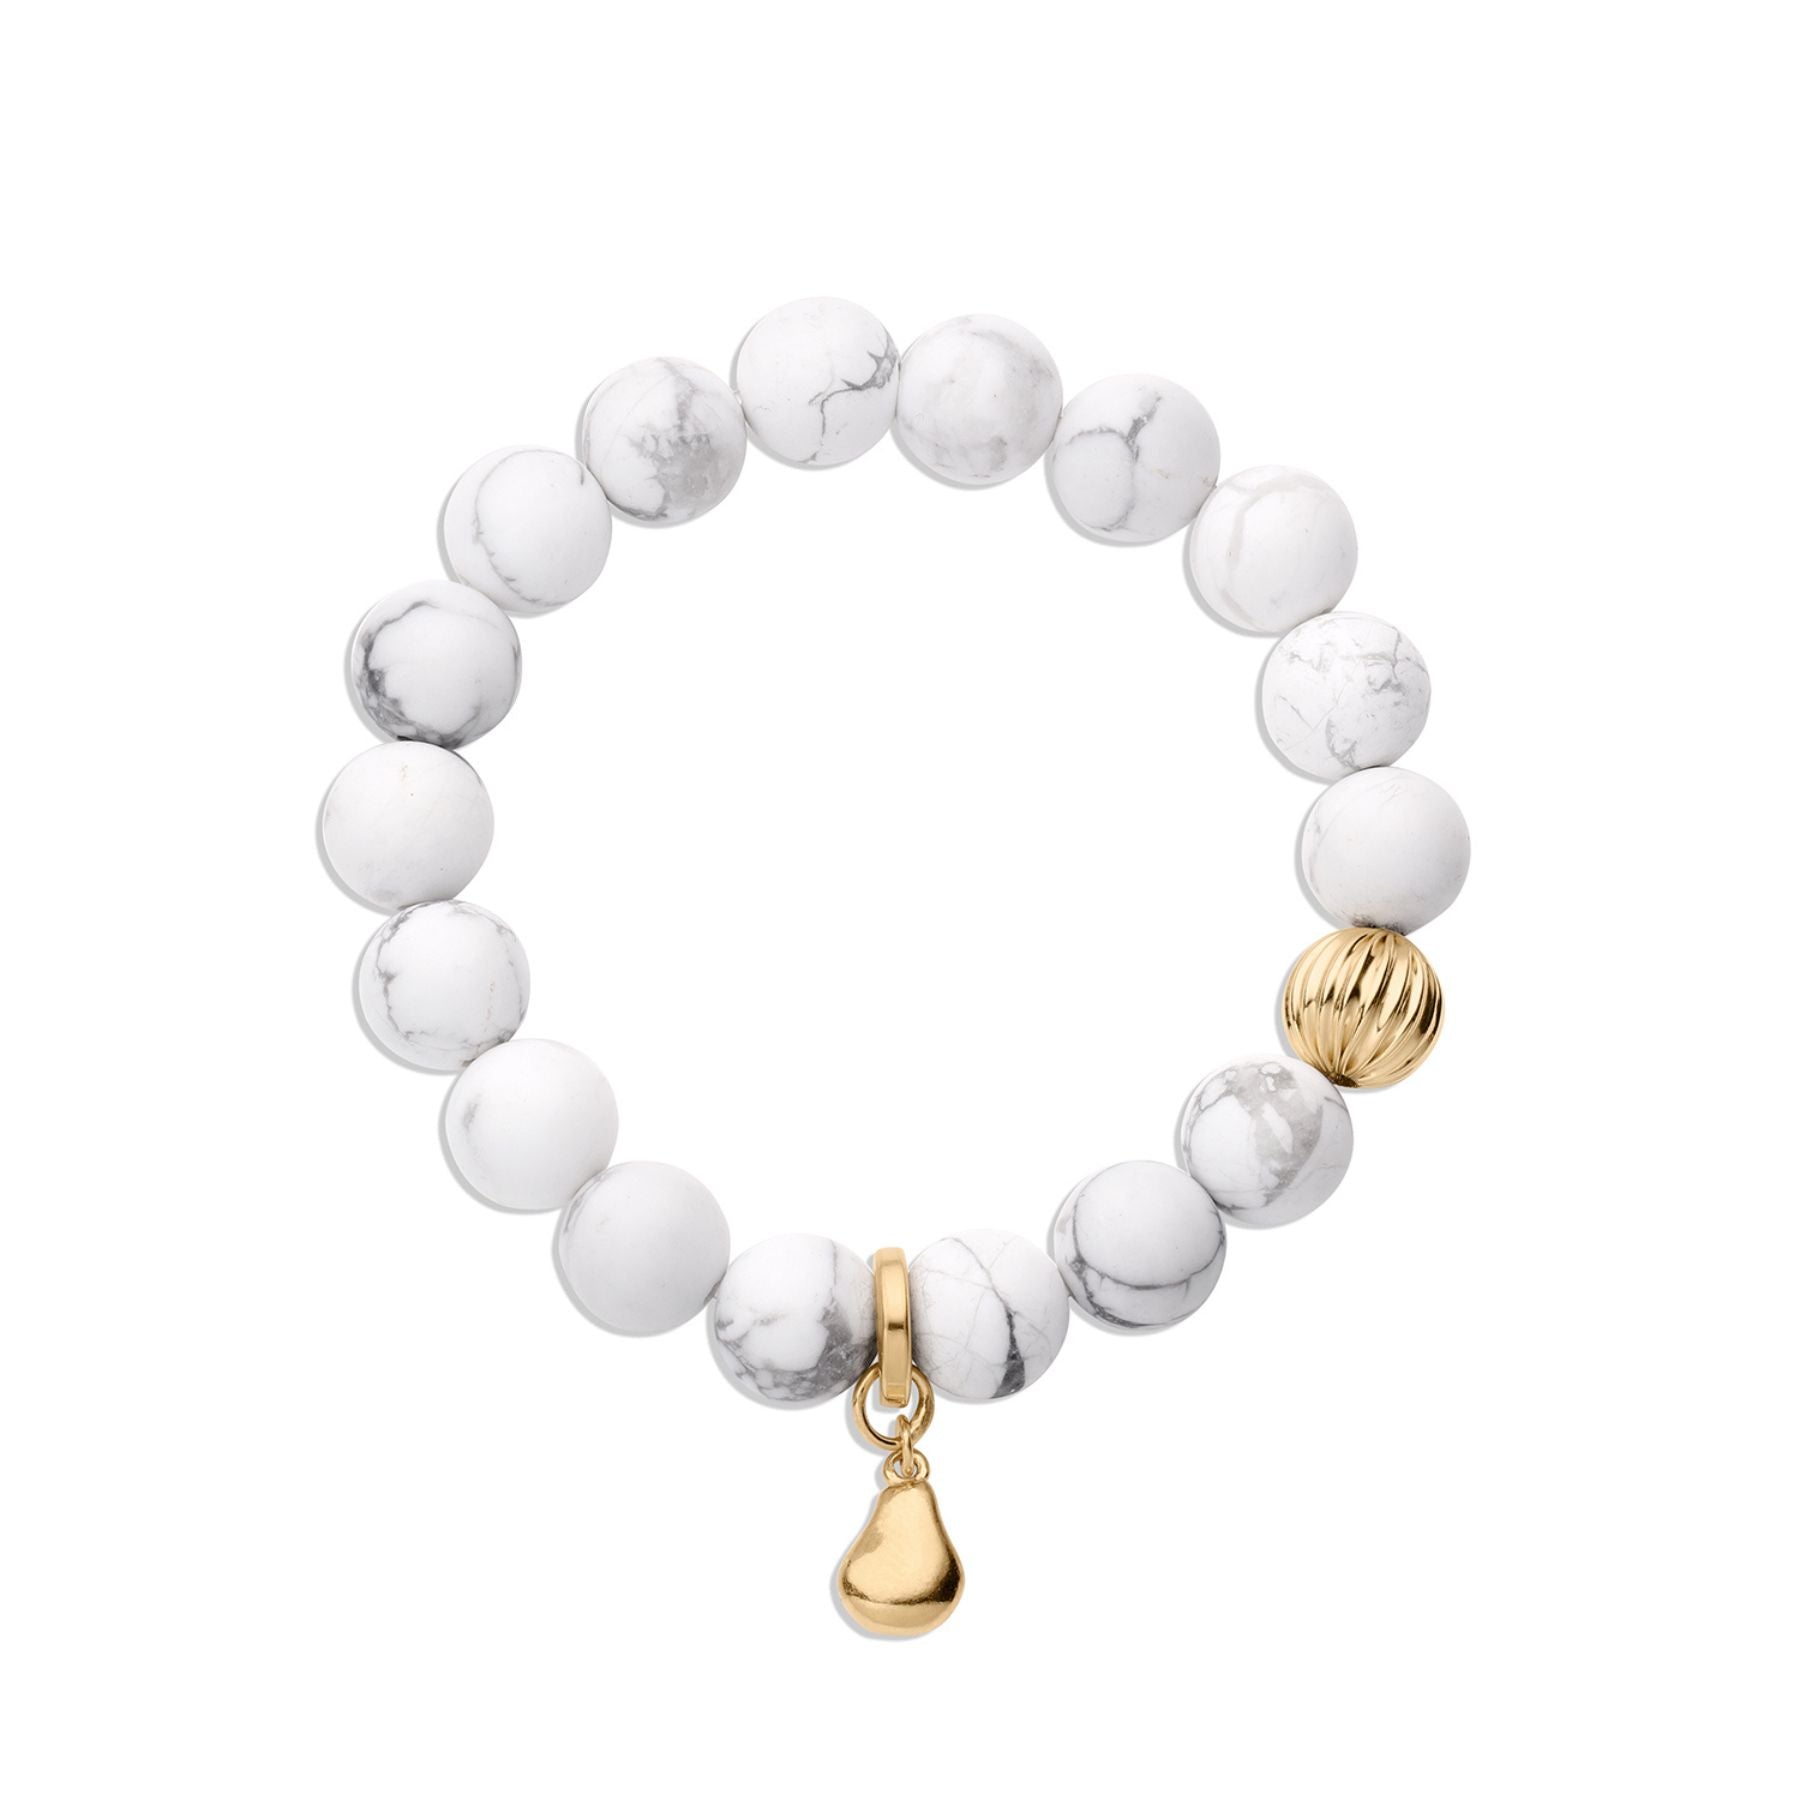 Howlite beaded bracelet with corrugated gold accent bead and gold pear charm.